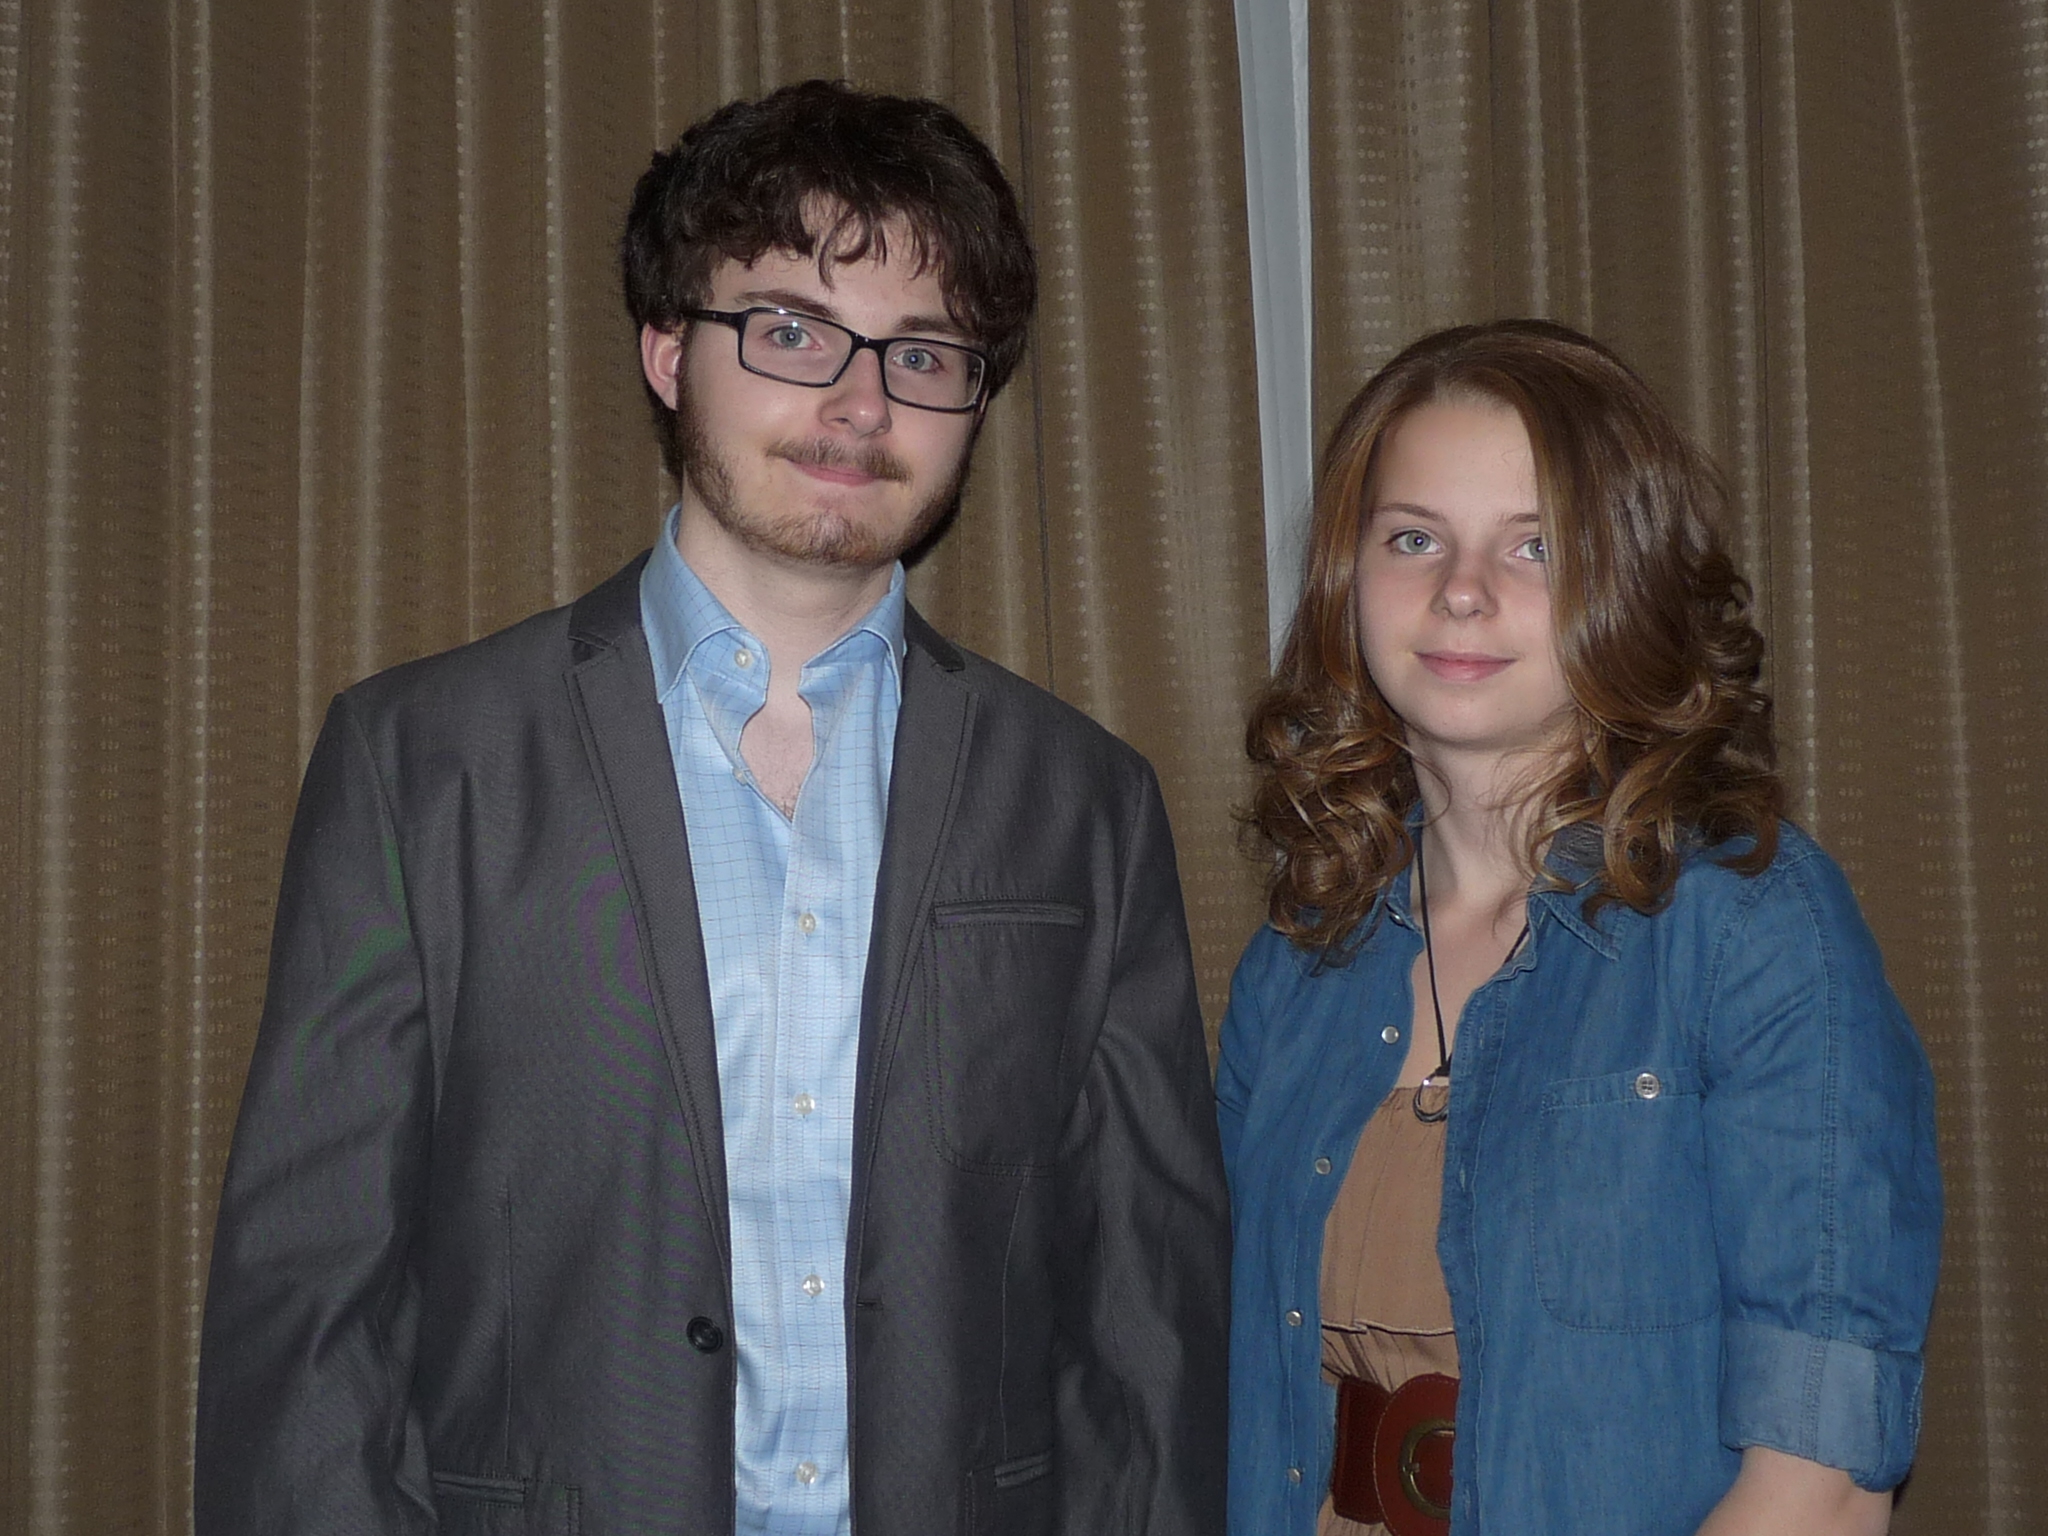 two people posing for a picture together in front of a curtain